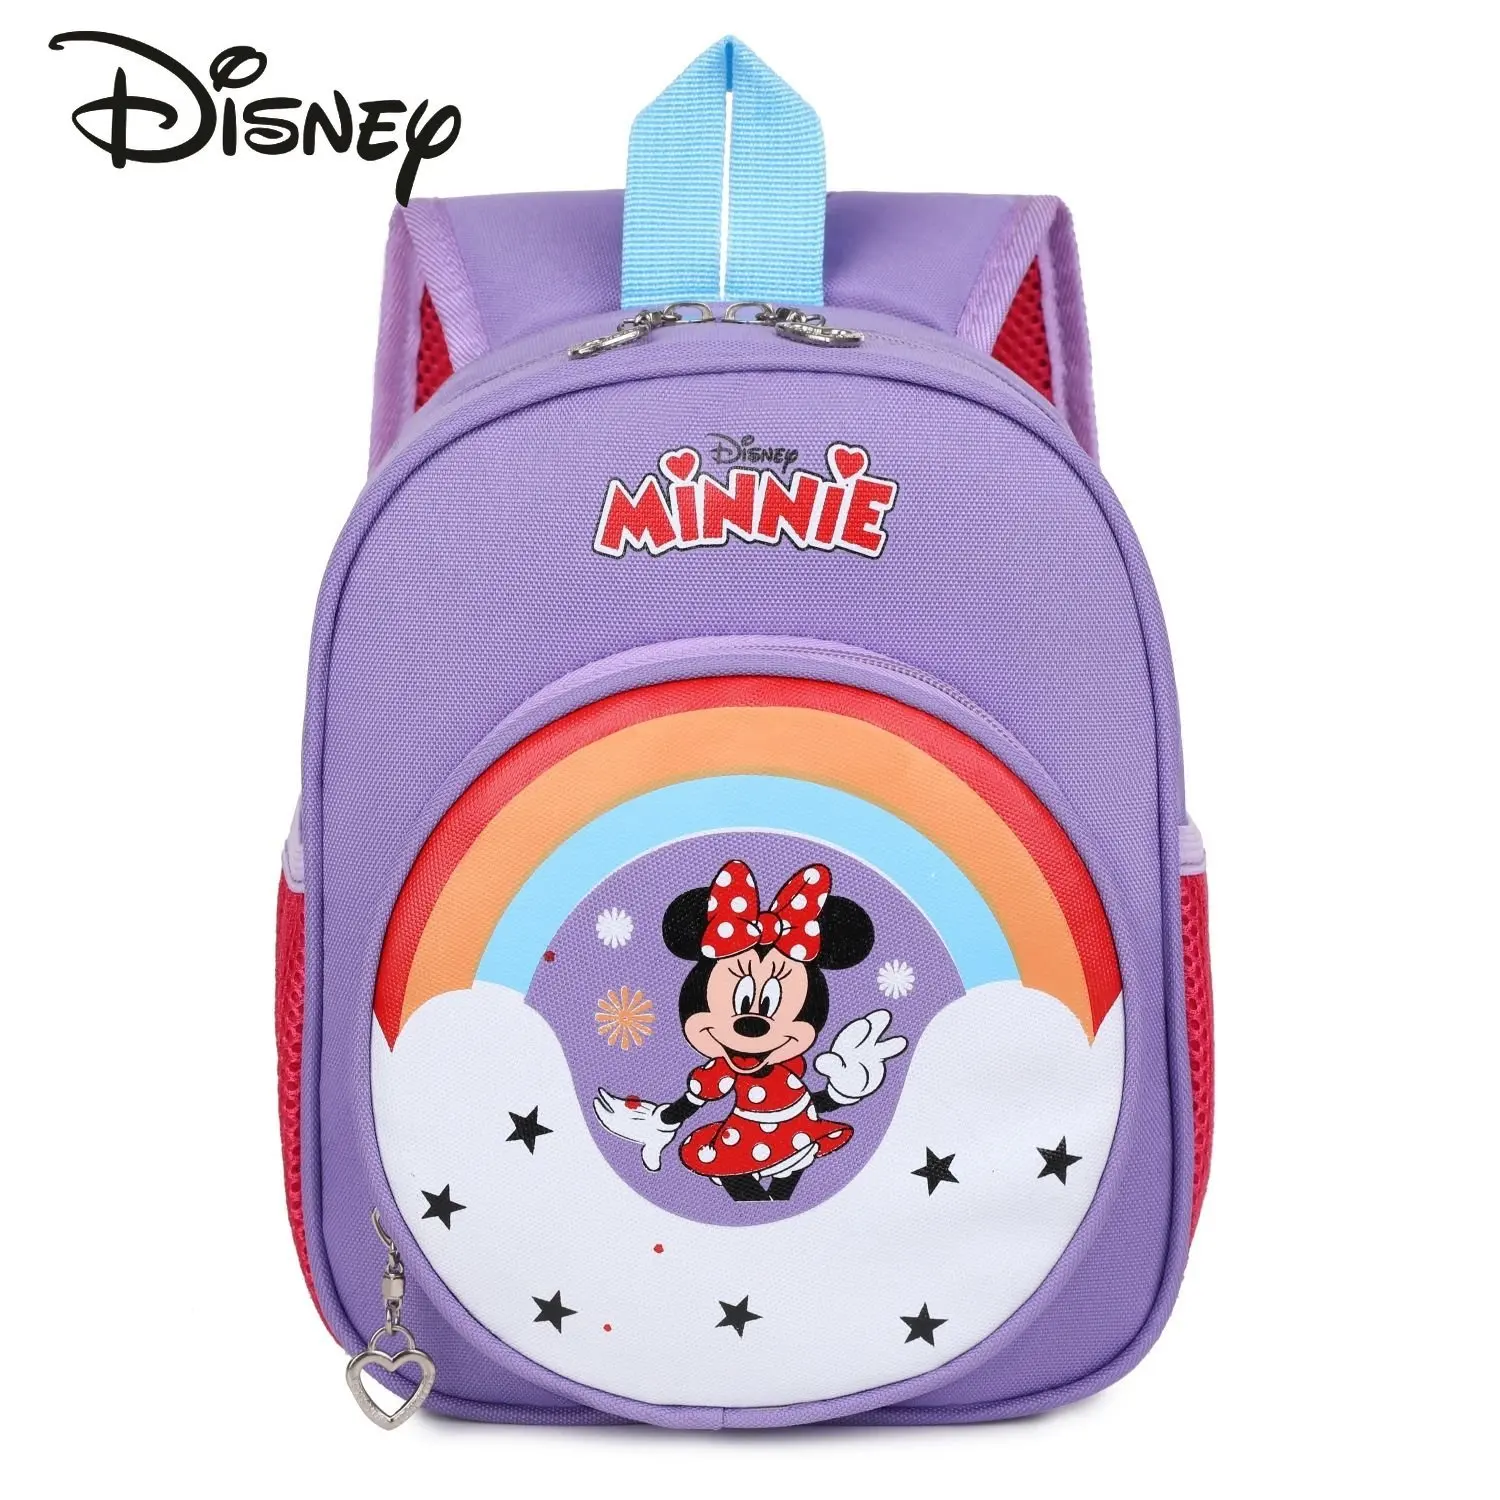 Disney Minnie New Fashion Children's School Bag High Quality Cartoon Student Backpack Large Capacity Casual Girls Backpack